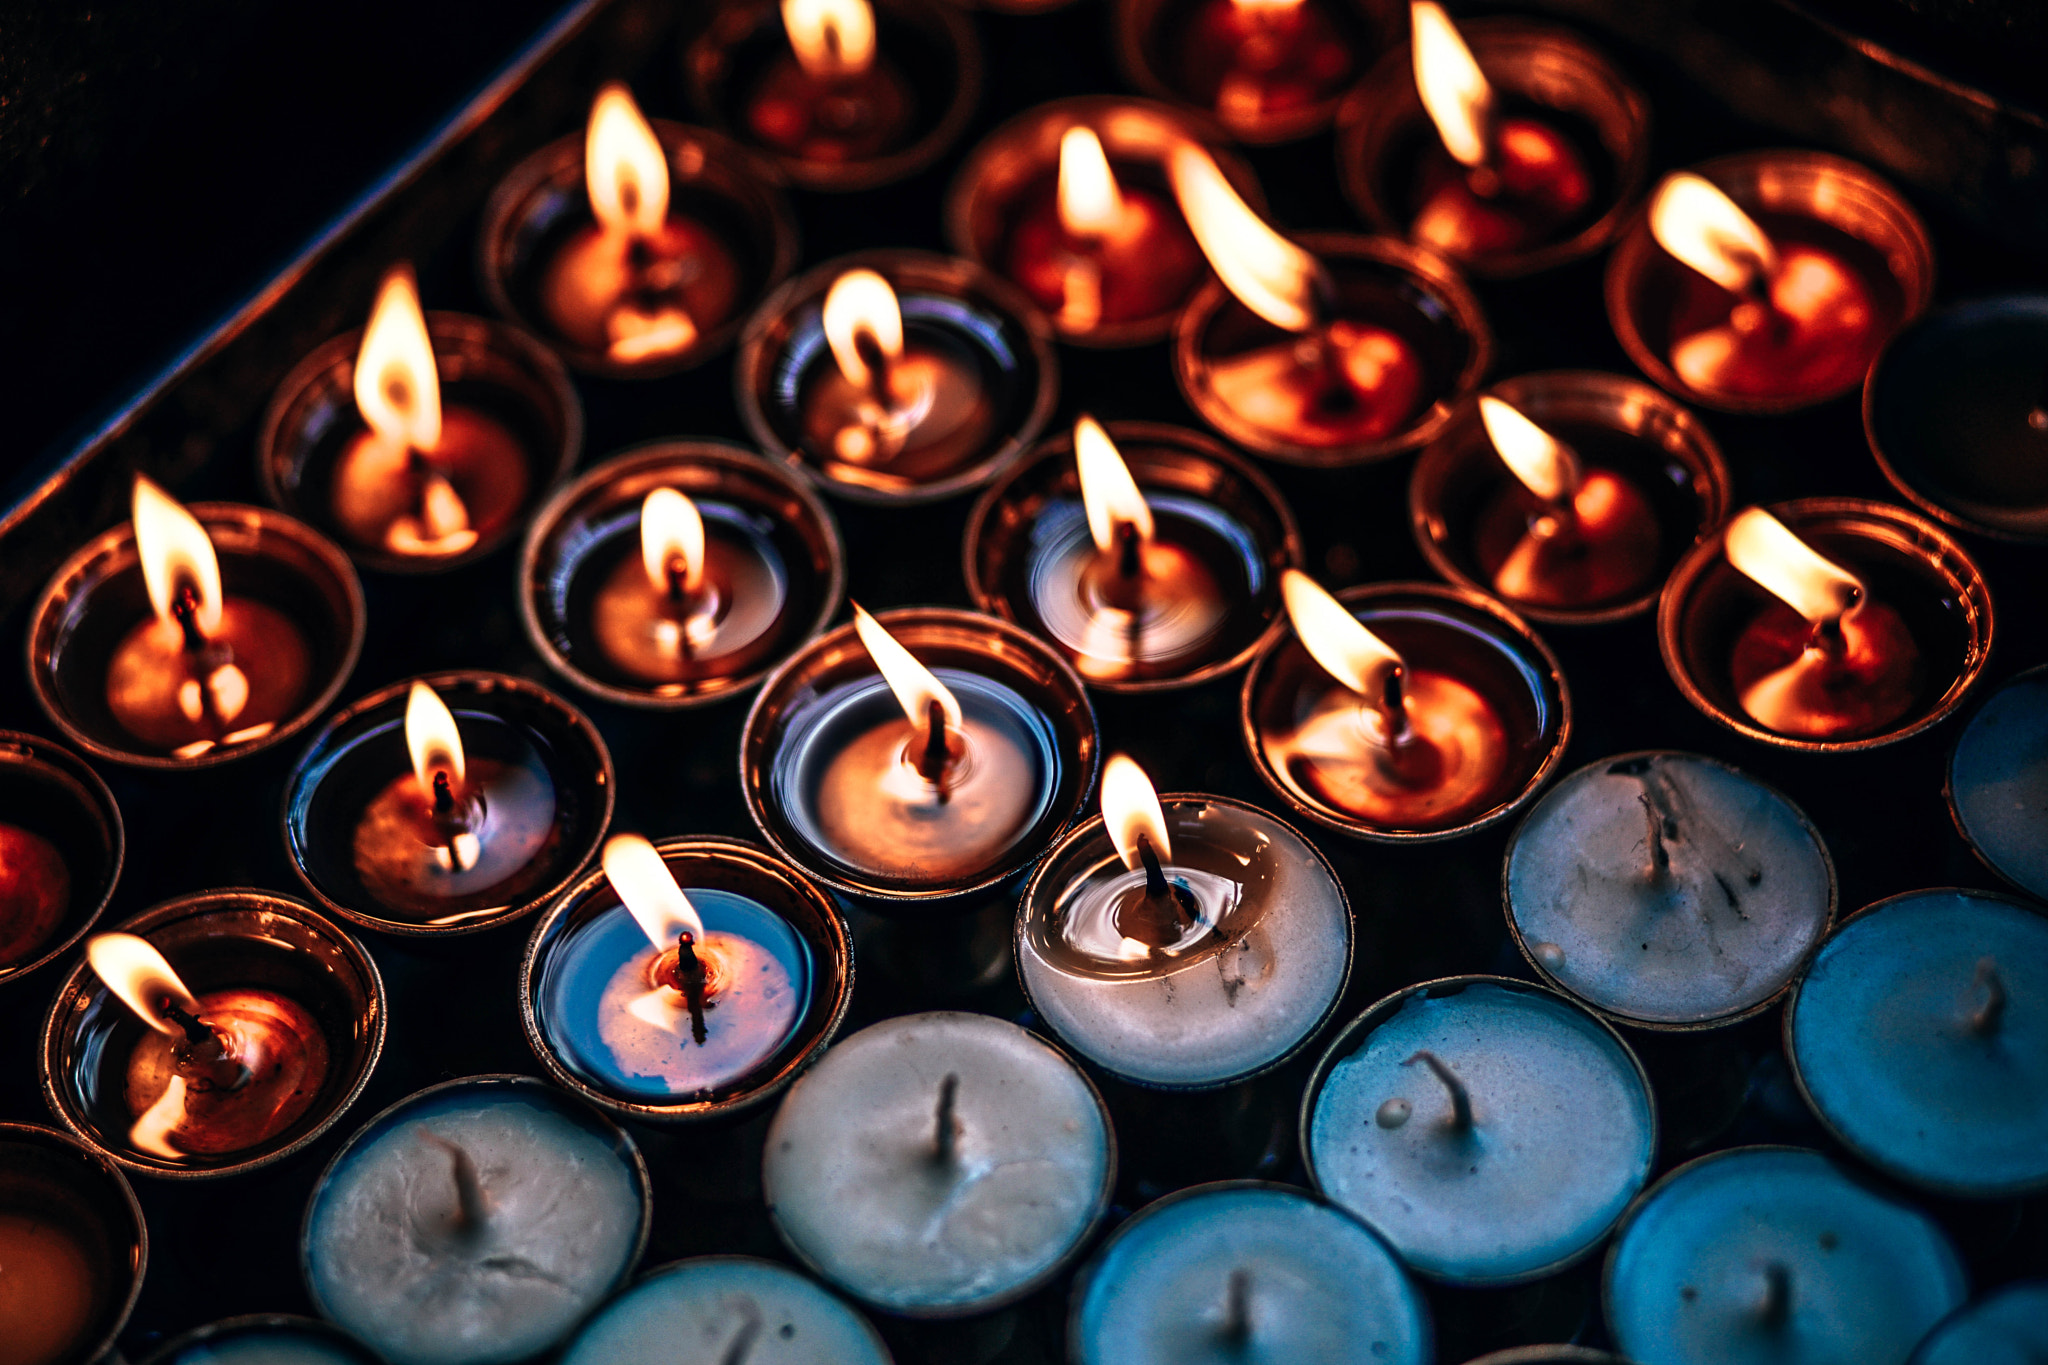 Sony a7 II sample photo. Burning prayer candles photography